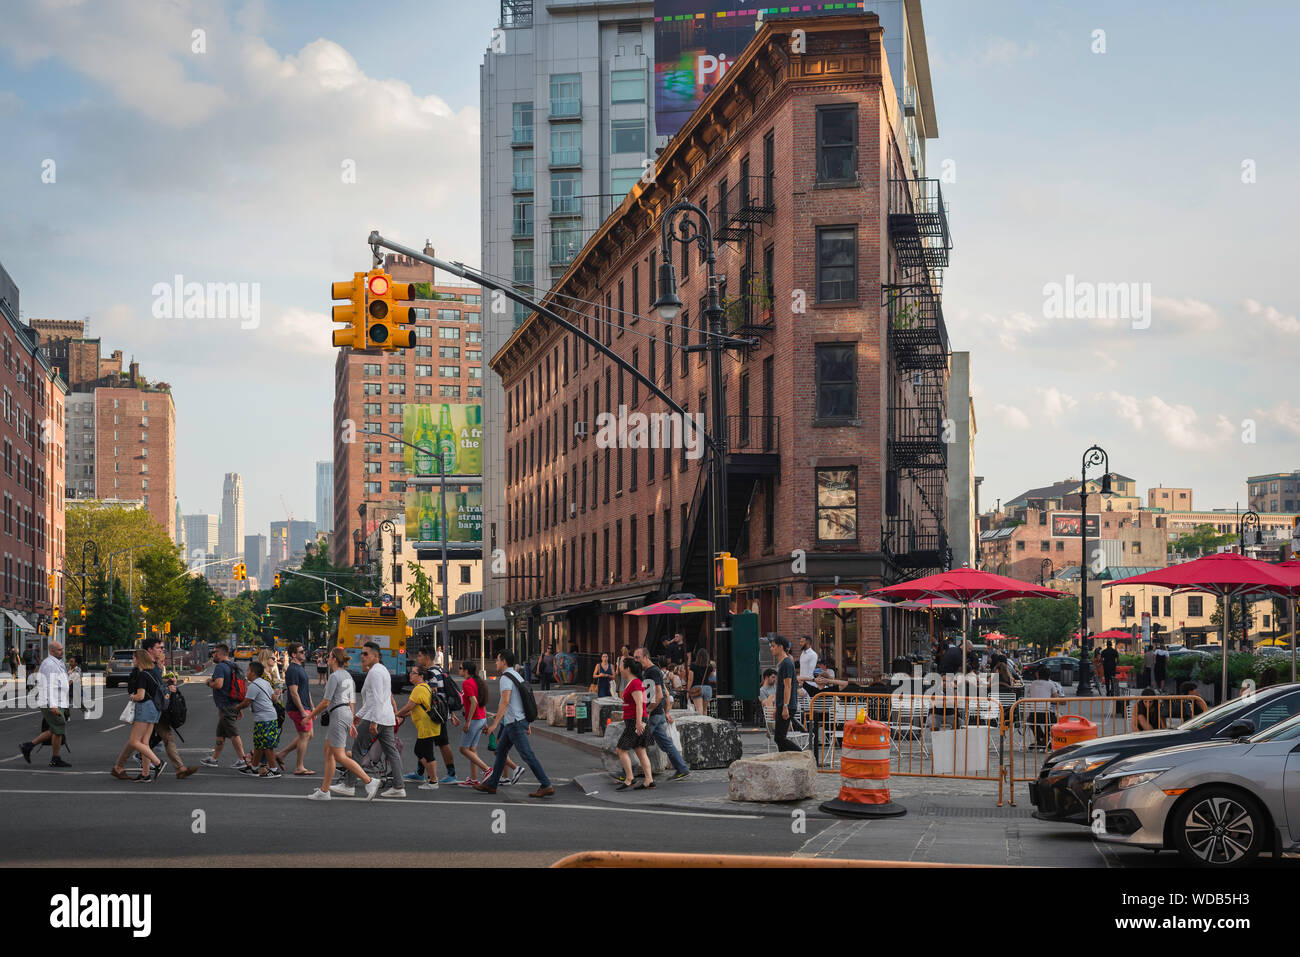 Meatpacking District New York, view of the the intersection of 9th Avenue and Hudson Street in the center of the Meatpacking District, New York City Stock Photo